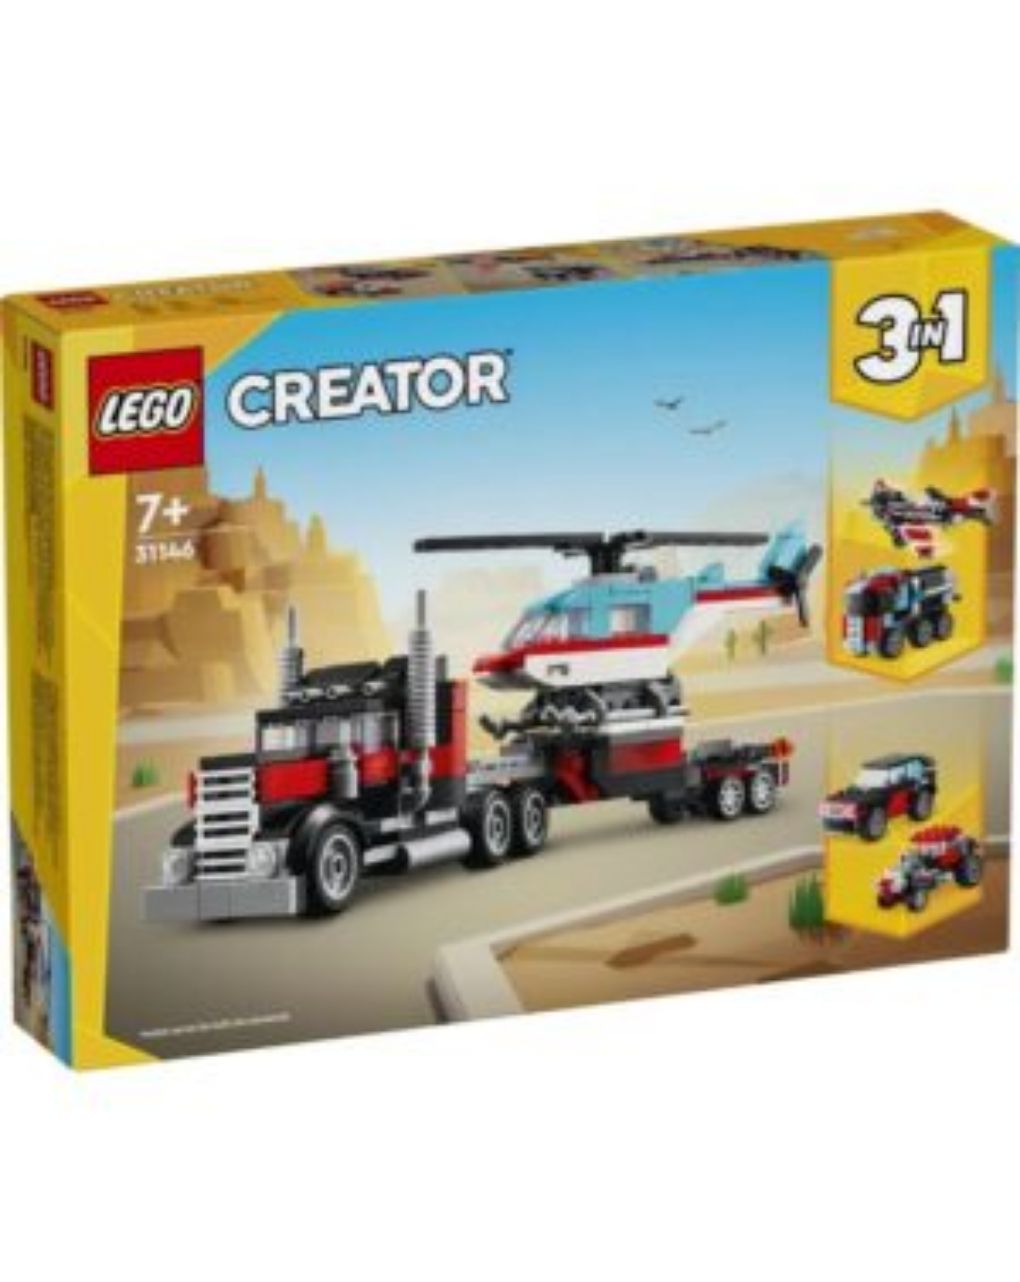 Lego creator 3 in 1 flatbed with helicopter 31146